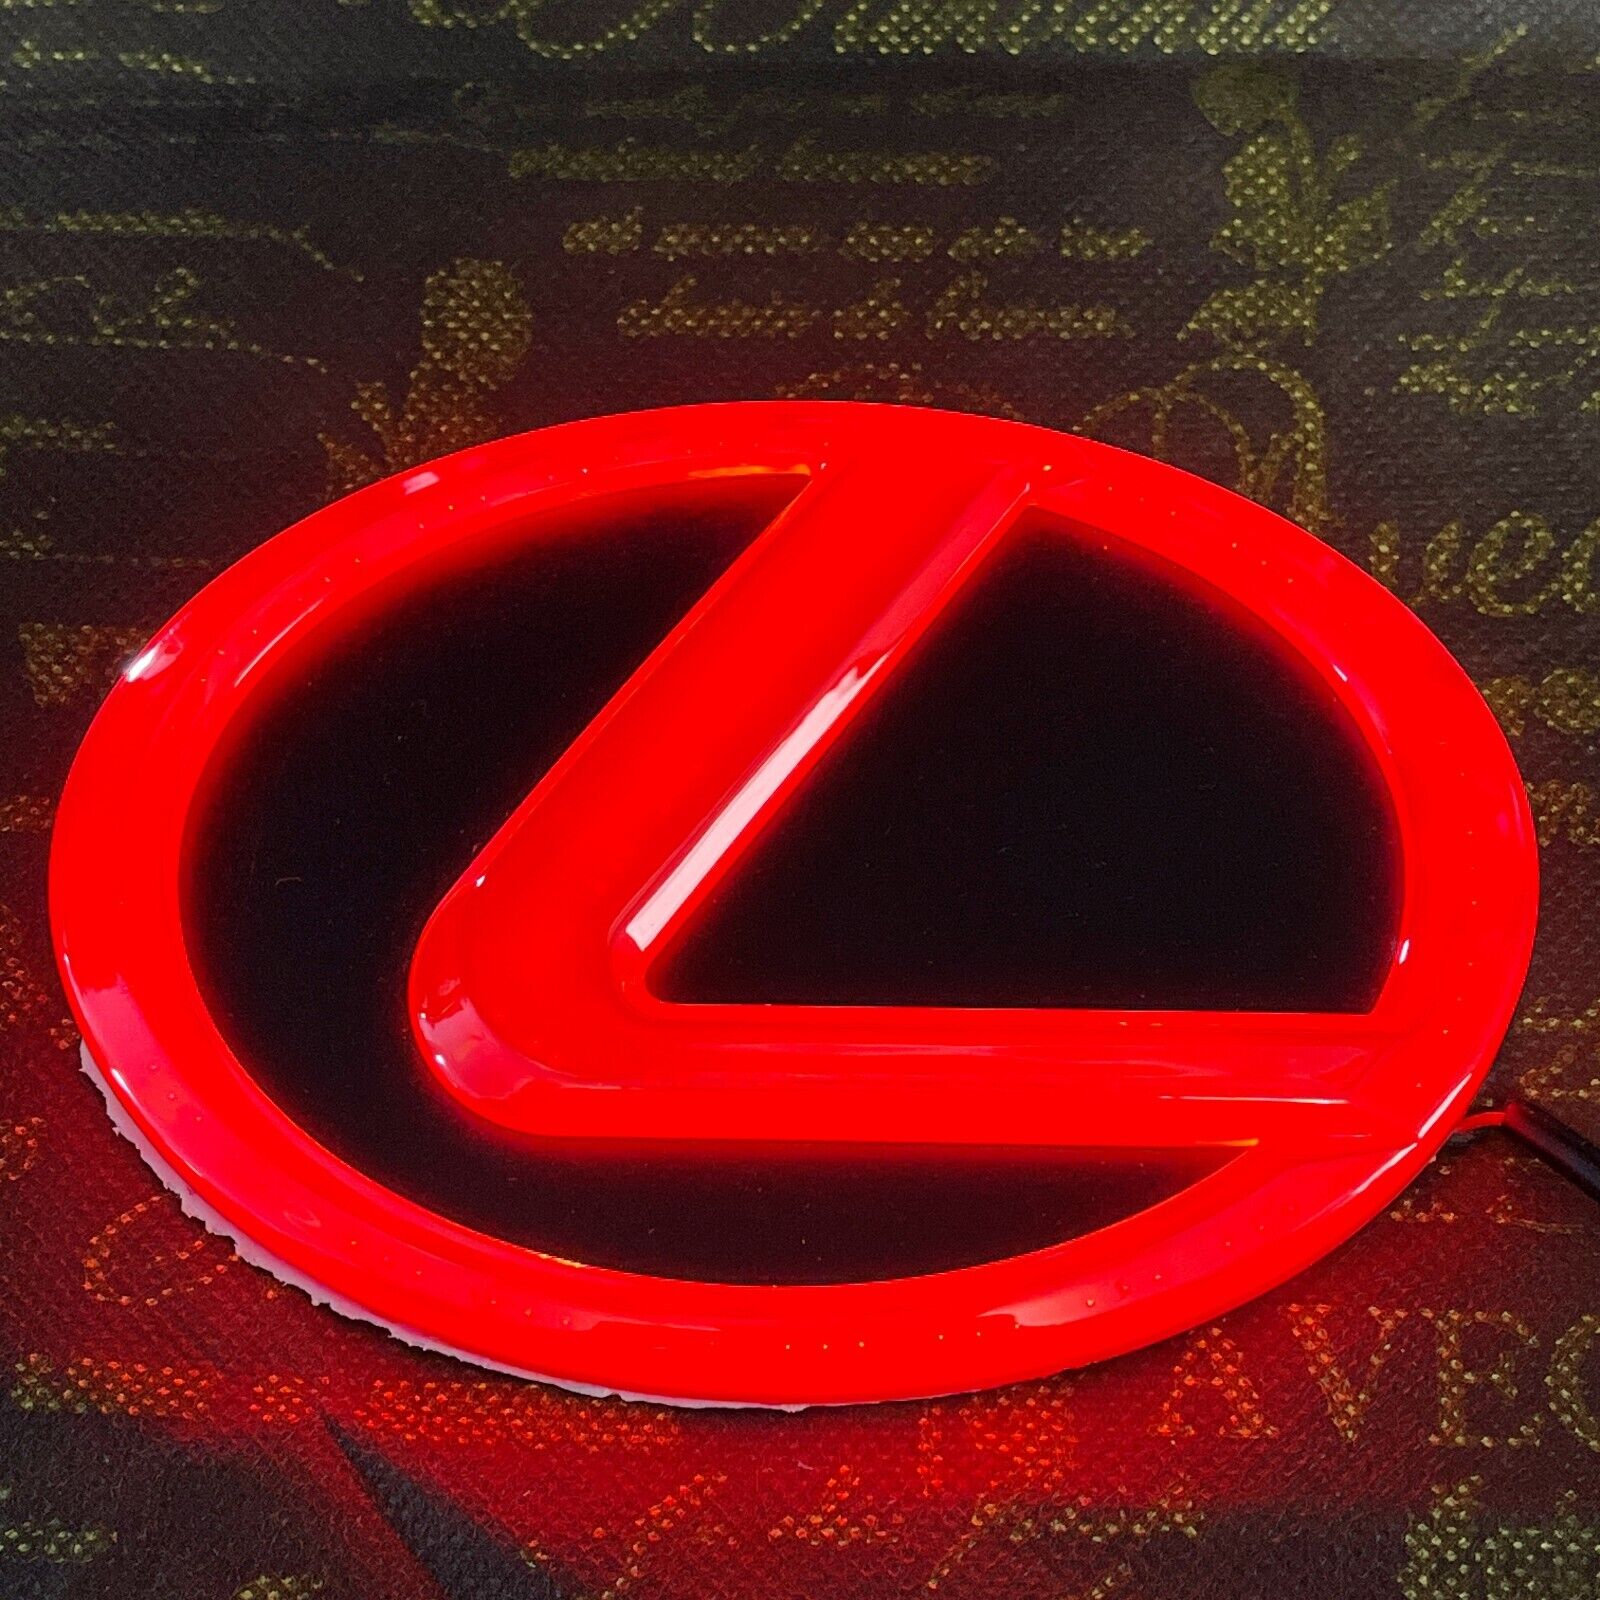 LEXUS LED 5D Emblem Logo 105mm*68mm (about 4.13 in*2.37 in) Red color